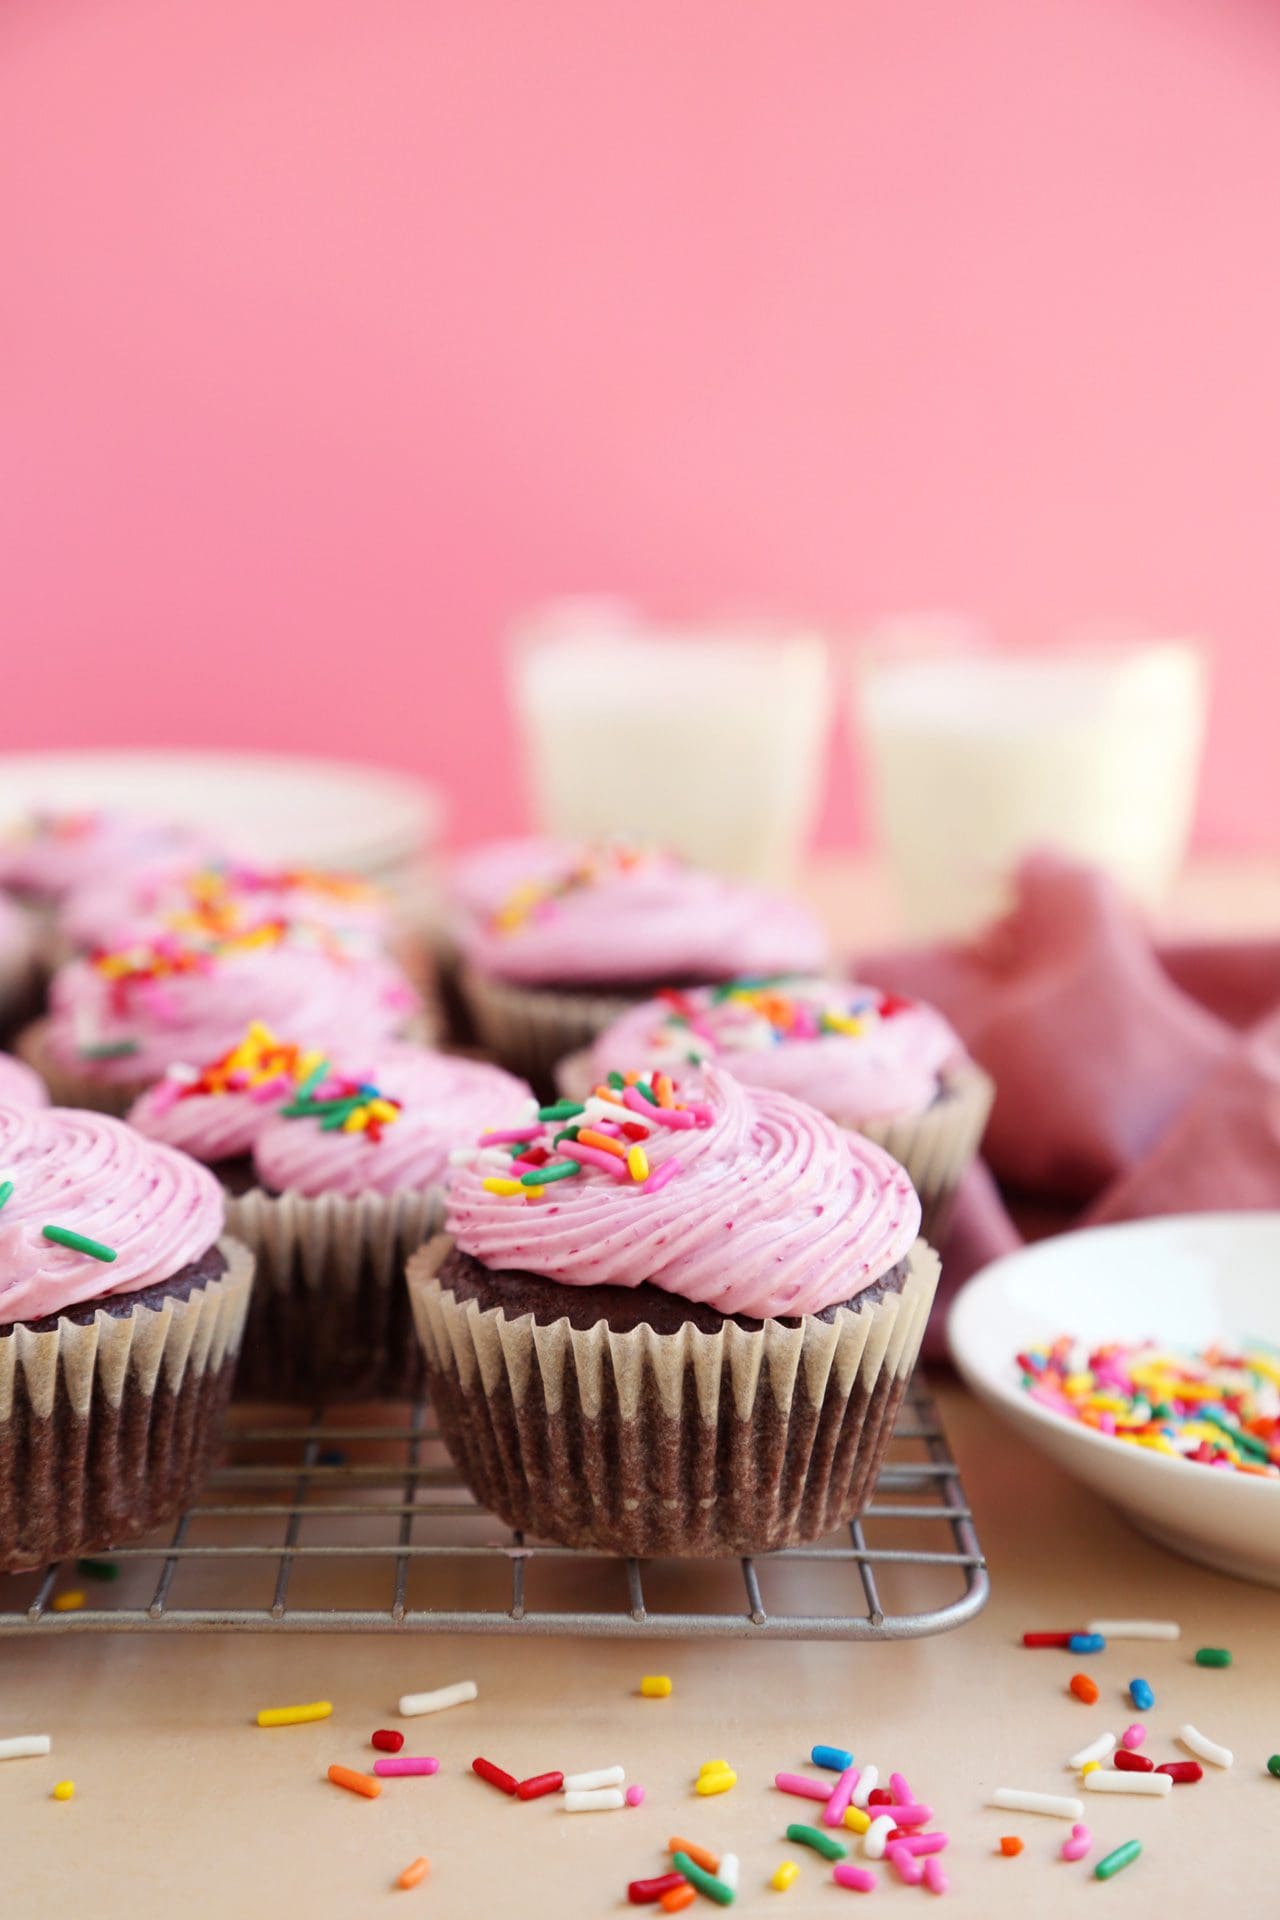 Birthday Cupcakes with Sprinkles (dairy free!) - Simply Whisked